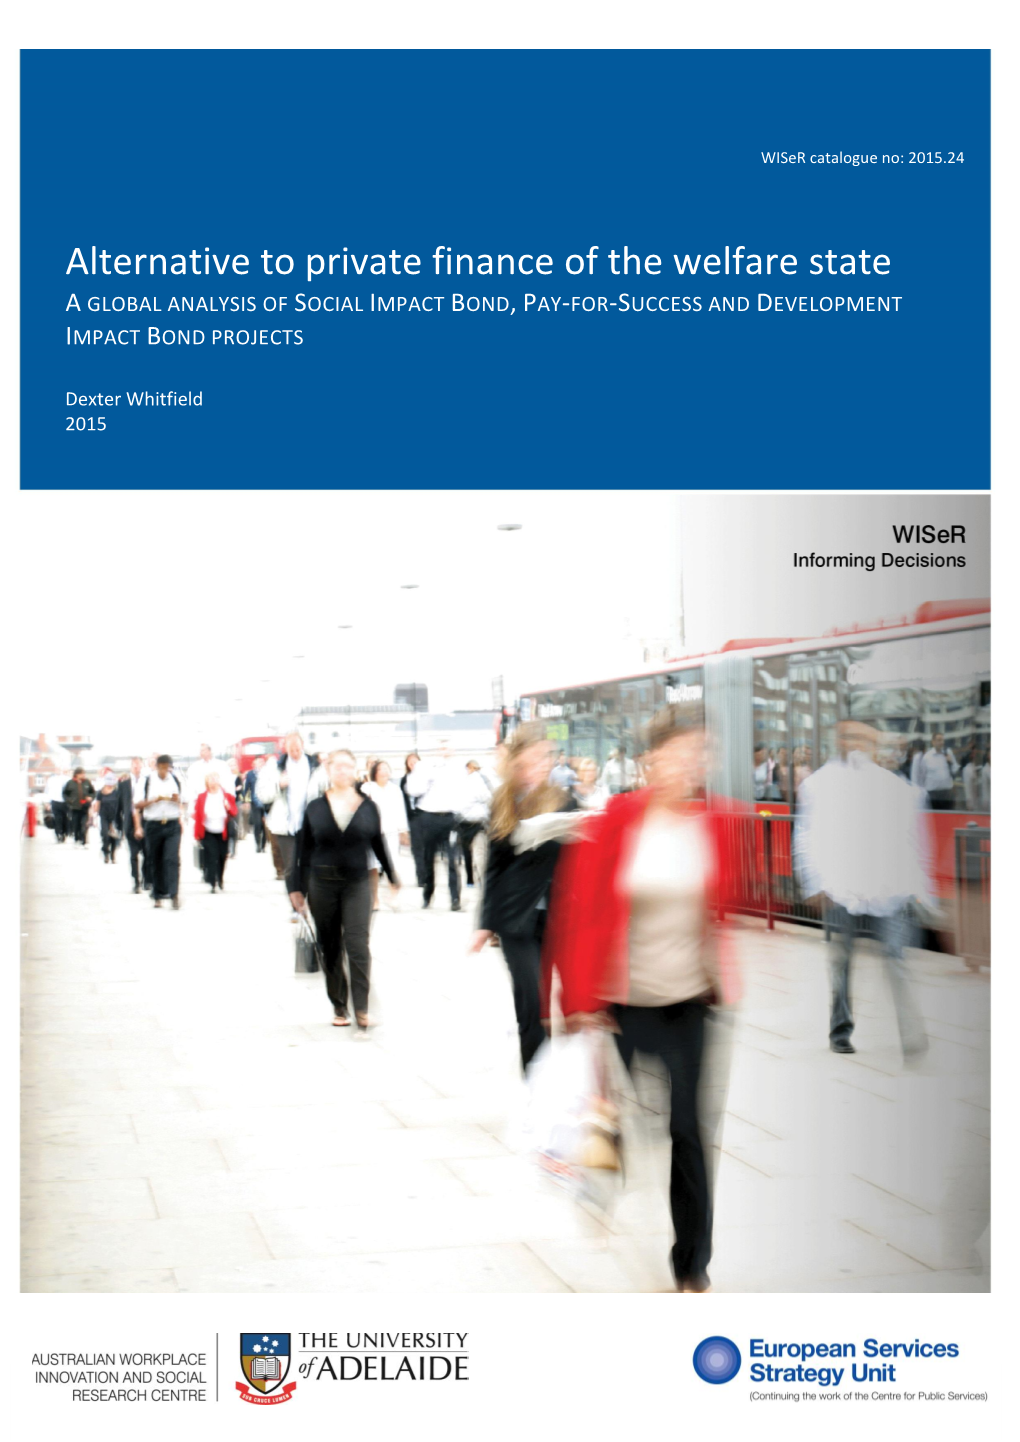 Alternative to Private Finance of the Welfare State a GLOBAL ANALYSIS of SOCIAL IMPACT BOND, PAY-FOR-SUCCESS and DEVELOPMENT IMPACT BOND PROJECTS